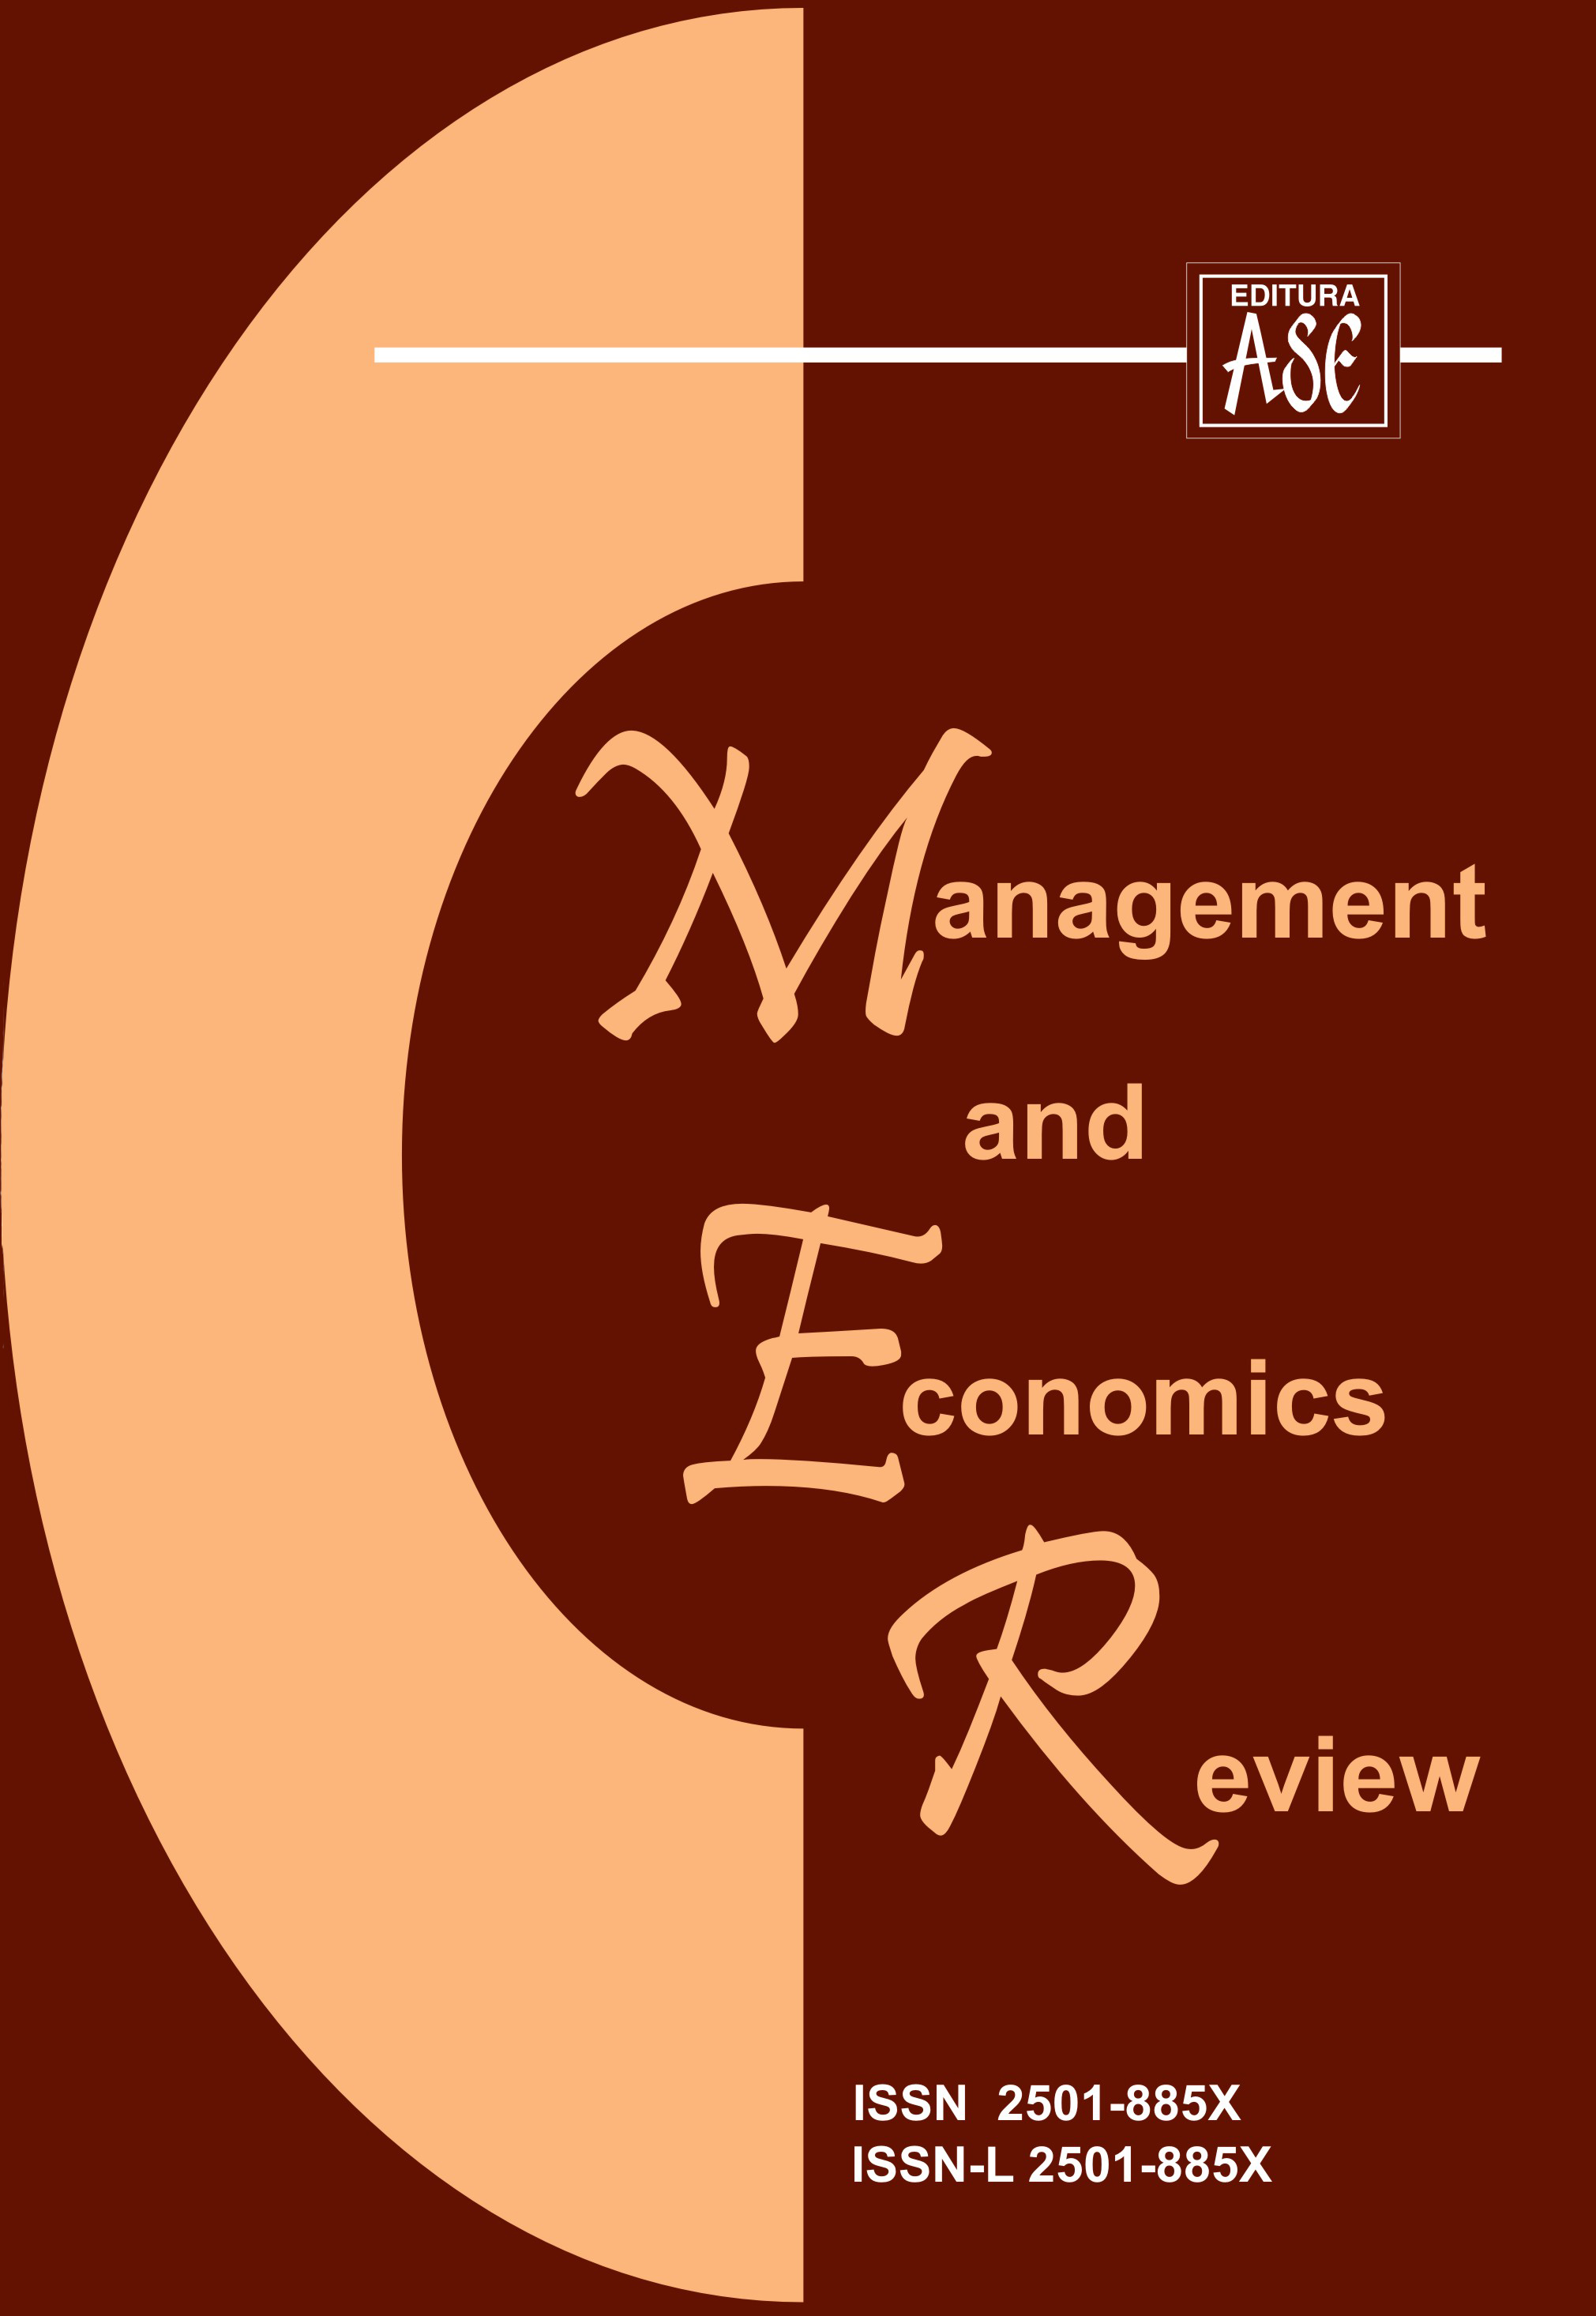 Improving the Engineering Students’ Entrepreneurial Self-Efficacy through a Specialised Course – A Way to Improve Startup Management Cover Image